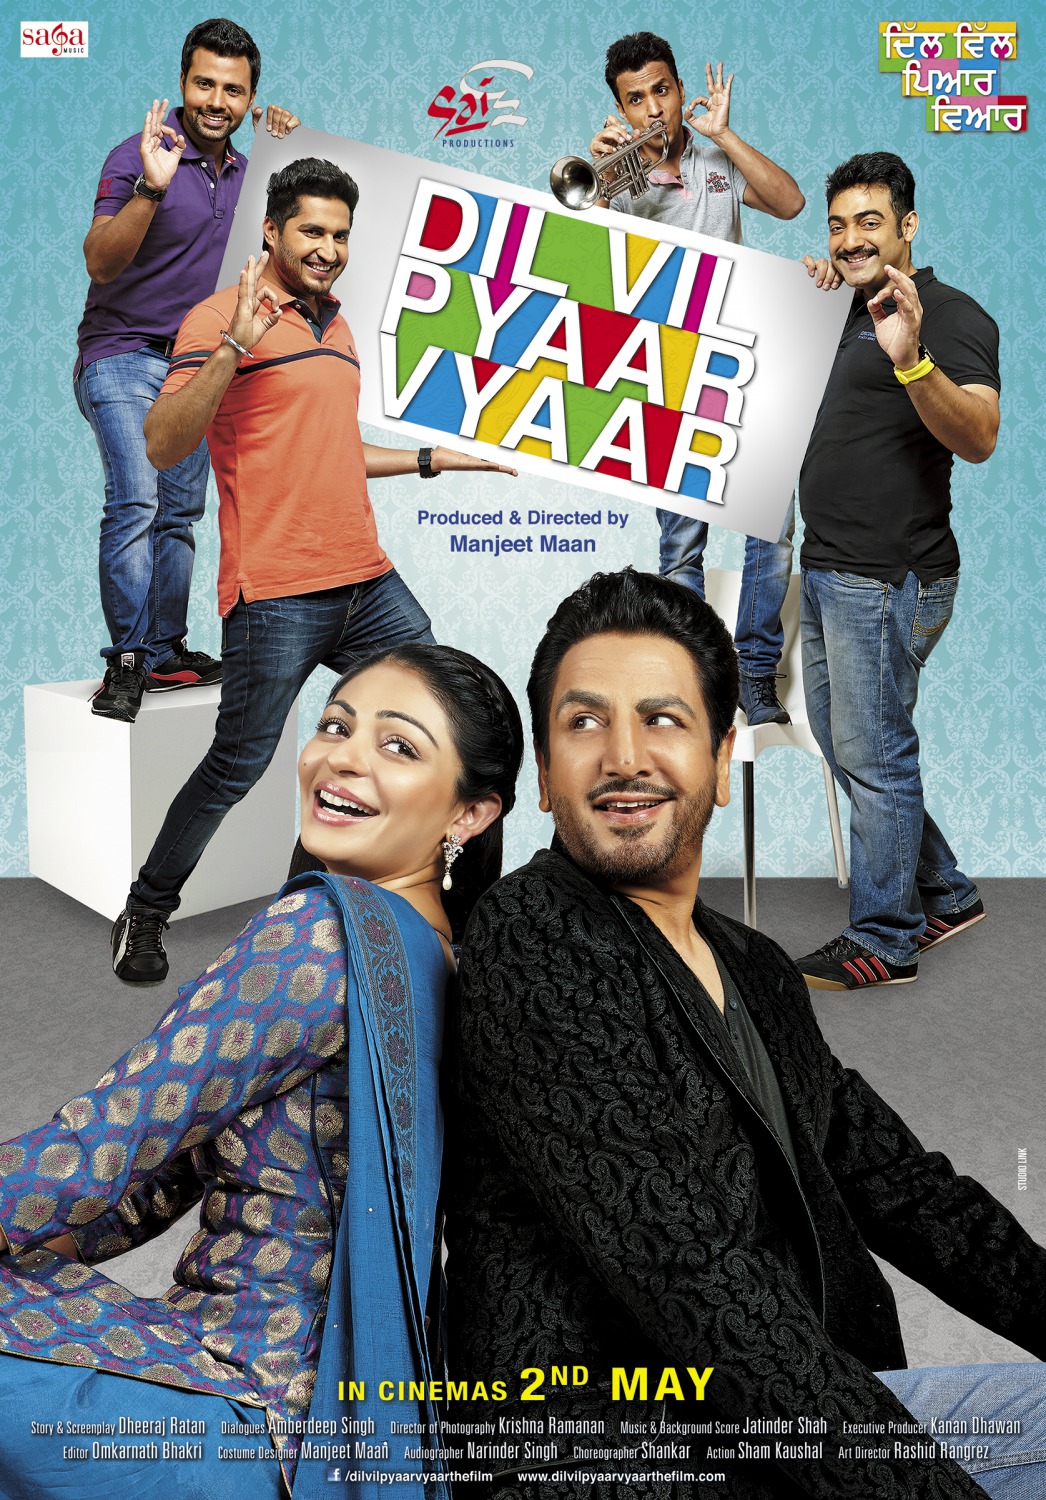 Extra Large Movie Poster Image for Dil Vil Pyaar Vyaar (#1 of 3)